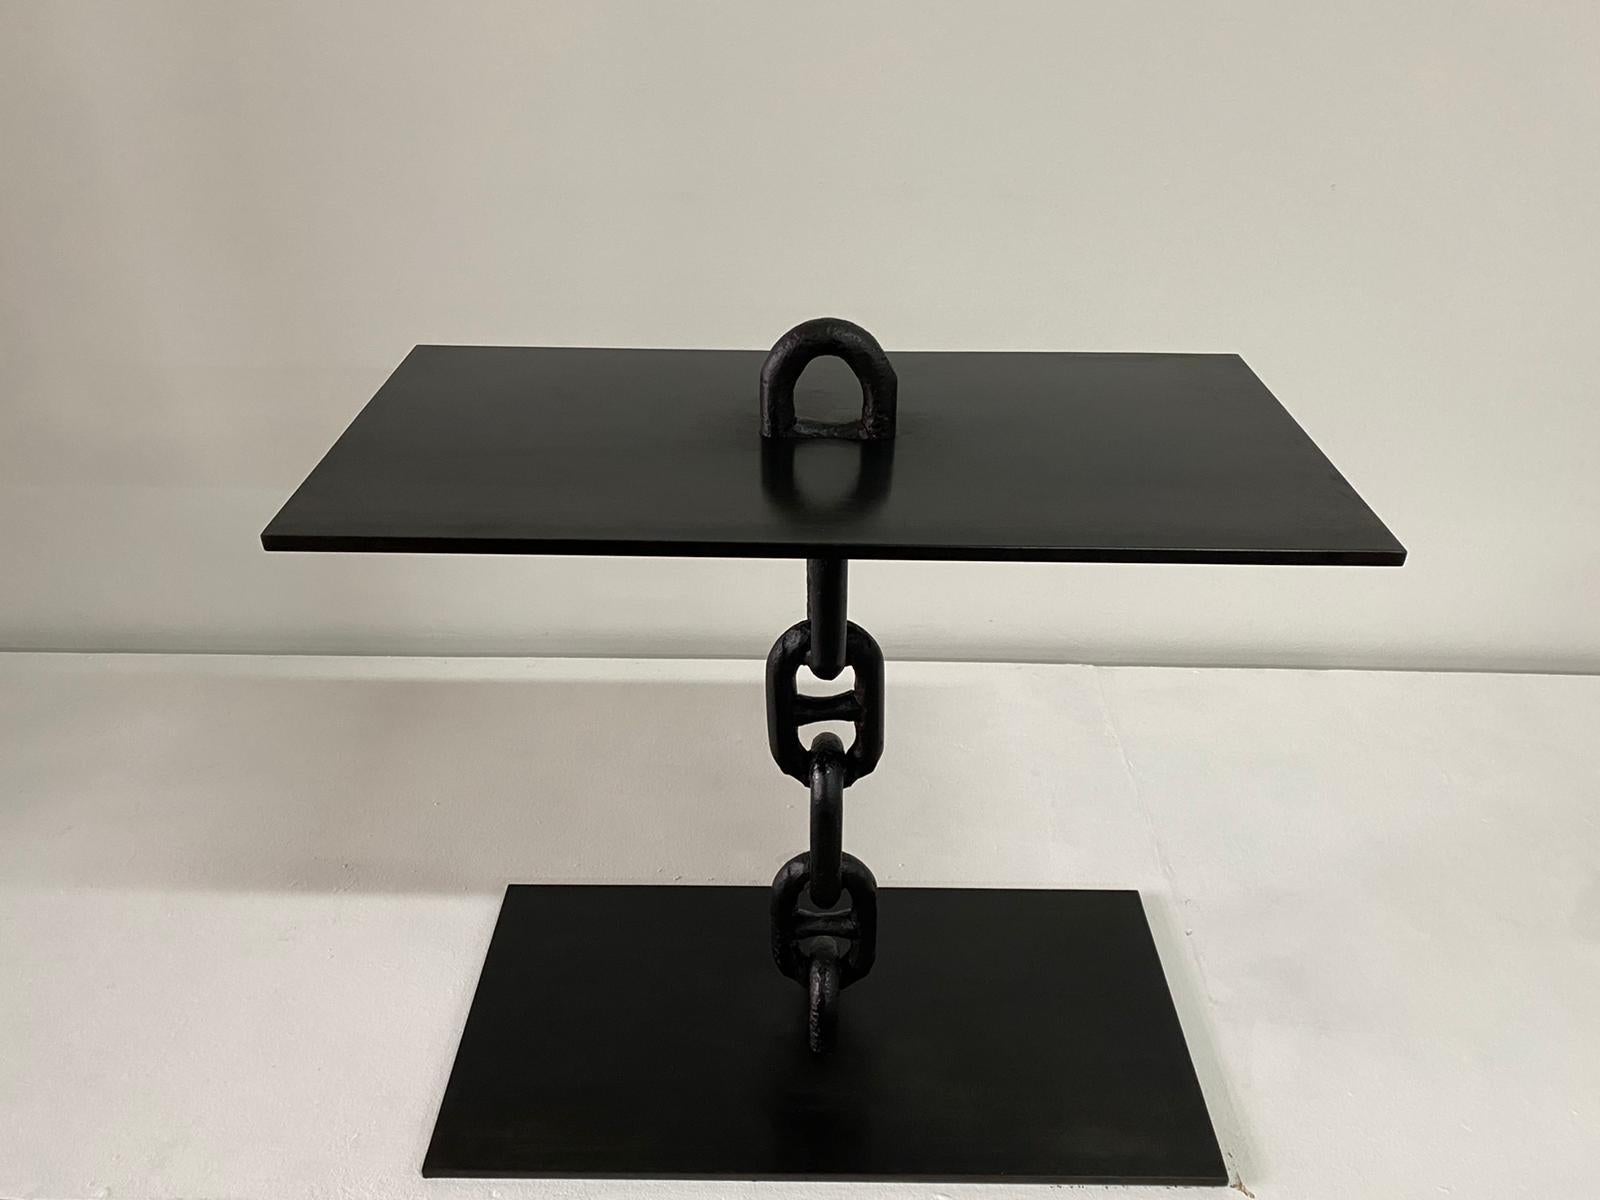 This custom design console is one-of-a-kind, only one made since antique chain links of this scale are rare. This is solid and heavy, finished in a blackened wax finish. Can be used indoors or outdoors. This console can be affixed to a wall with 2